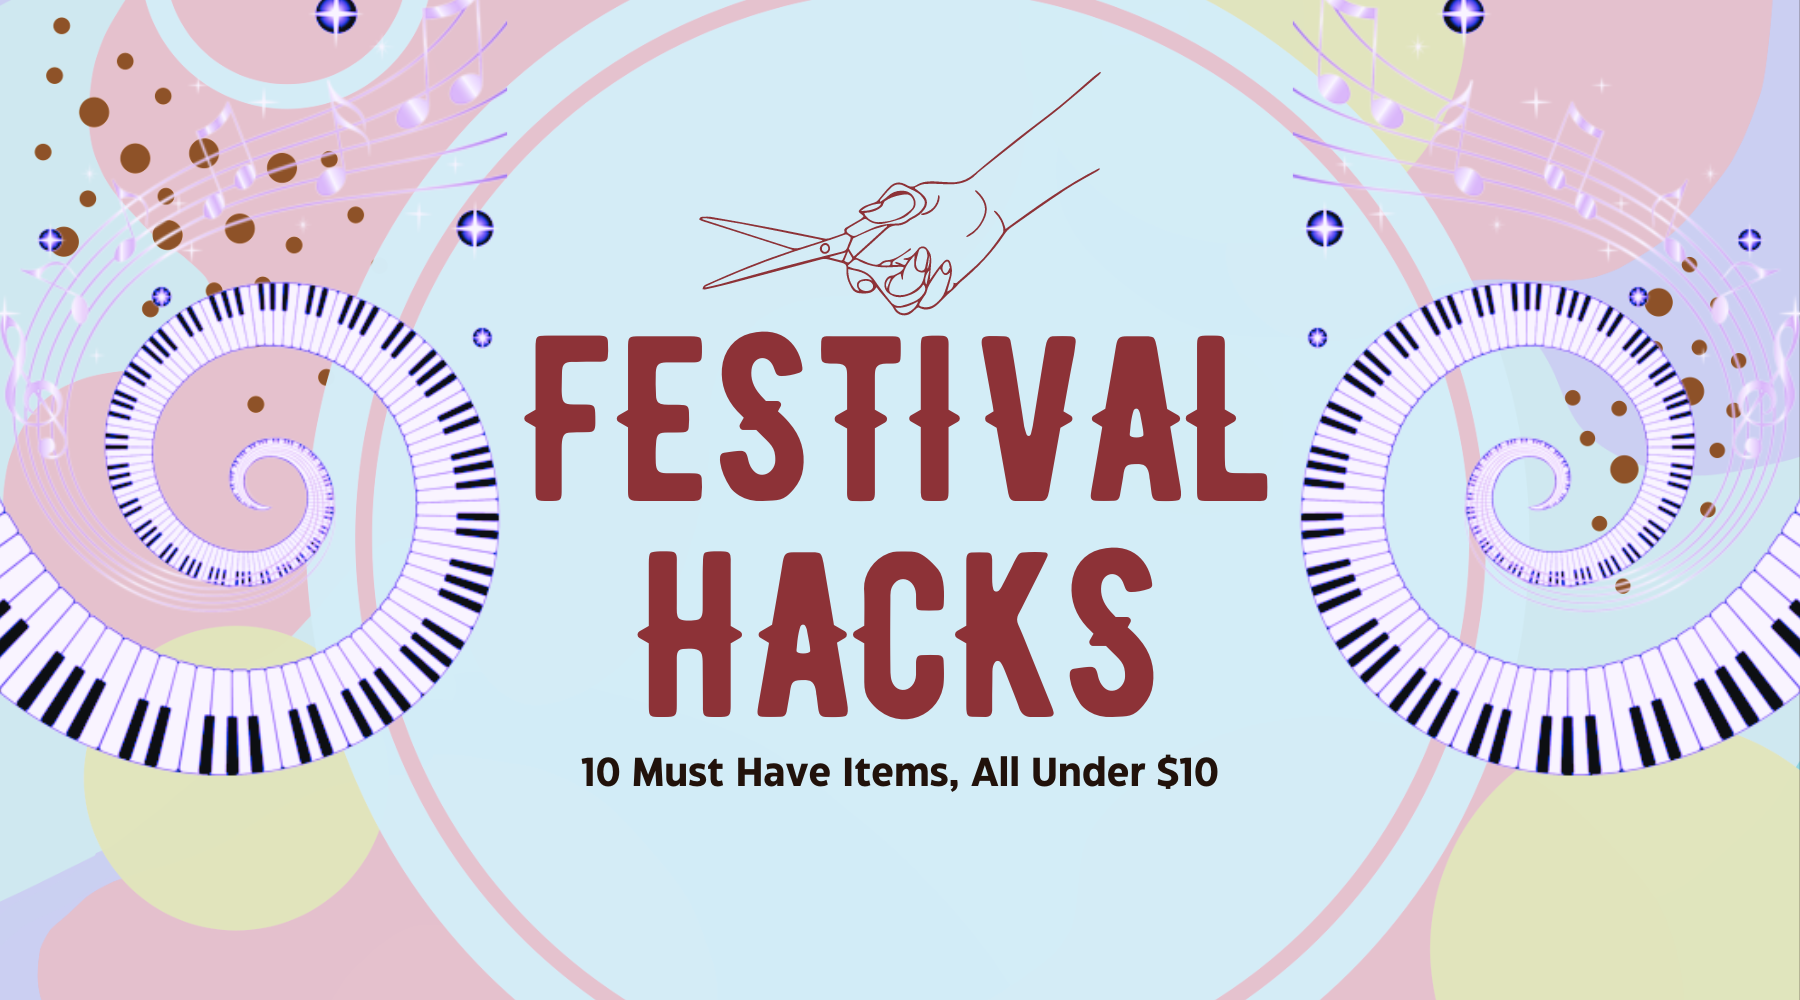 Festival Hacks: 10 Must-Have Items Under $10